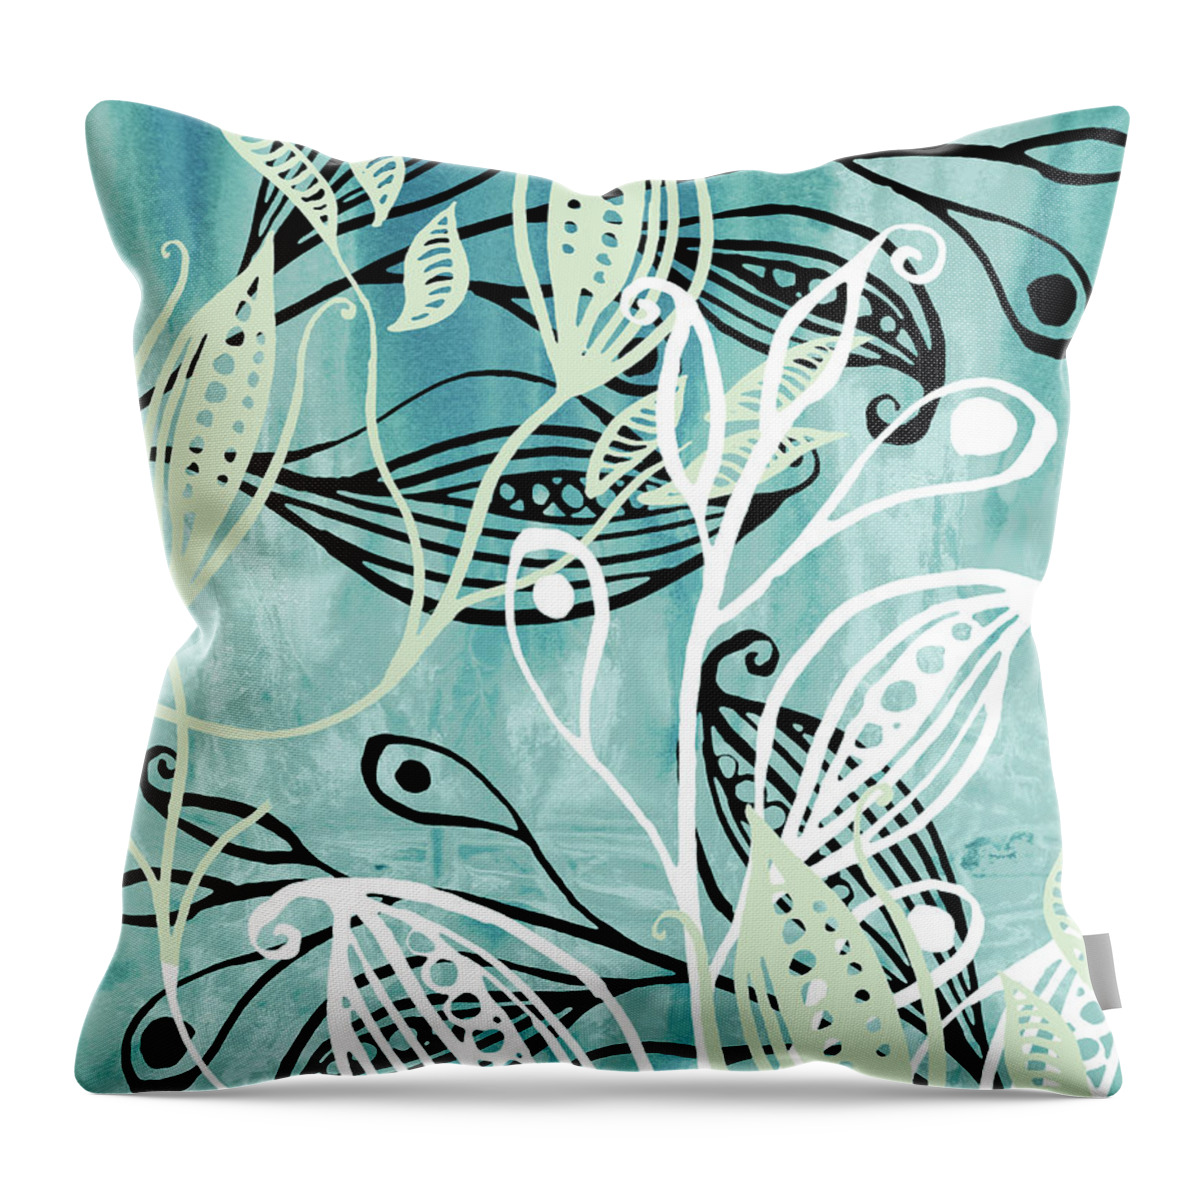 Pods Throw Pillow featuring the painting Elegant Pods And Seeds Pattern With Leaves Teal Blue Watercolor IV by Irina Sztukowski